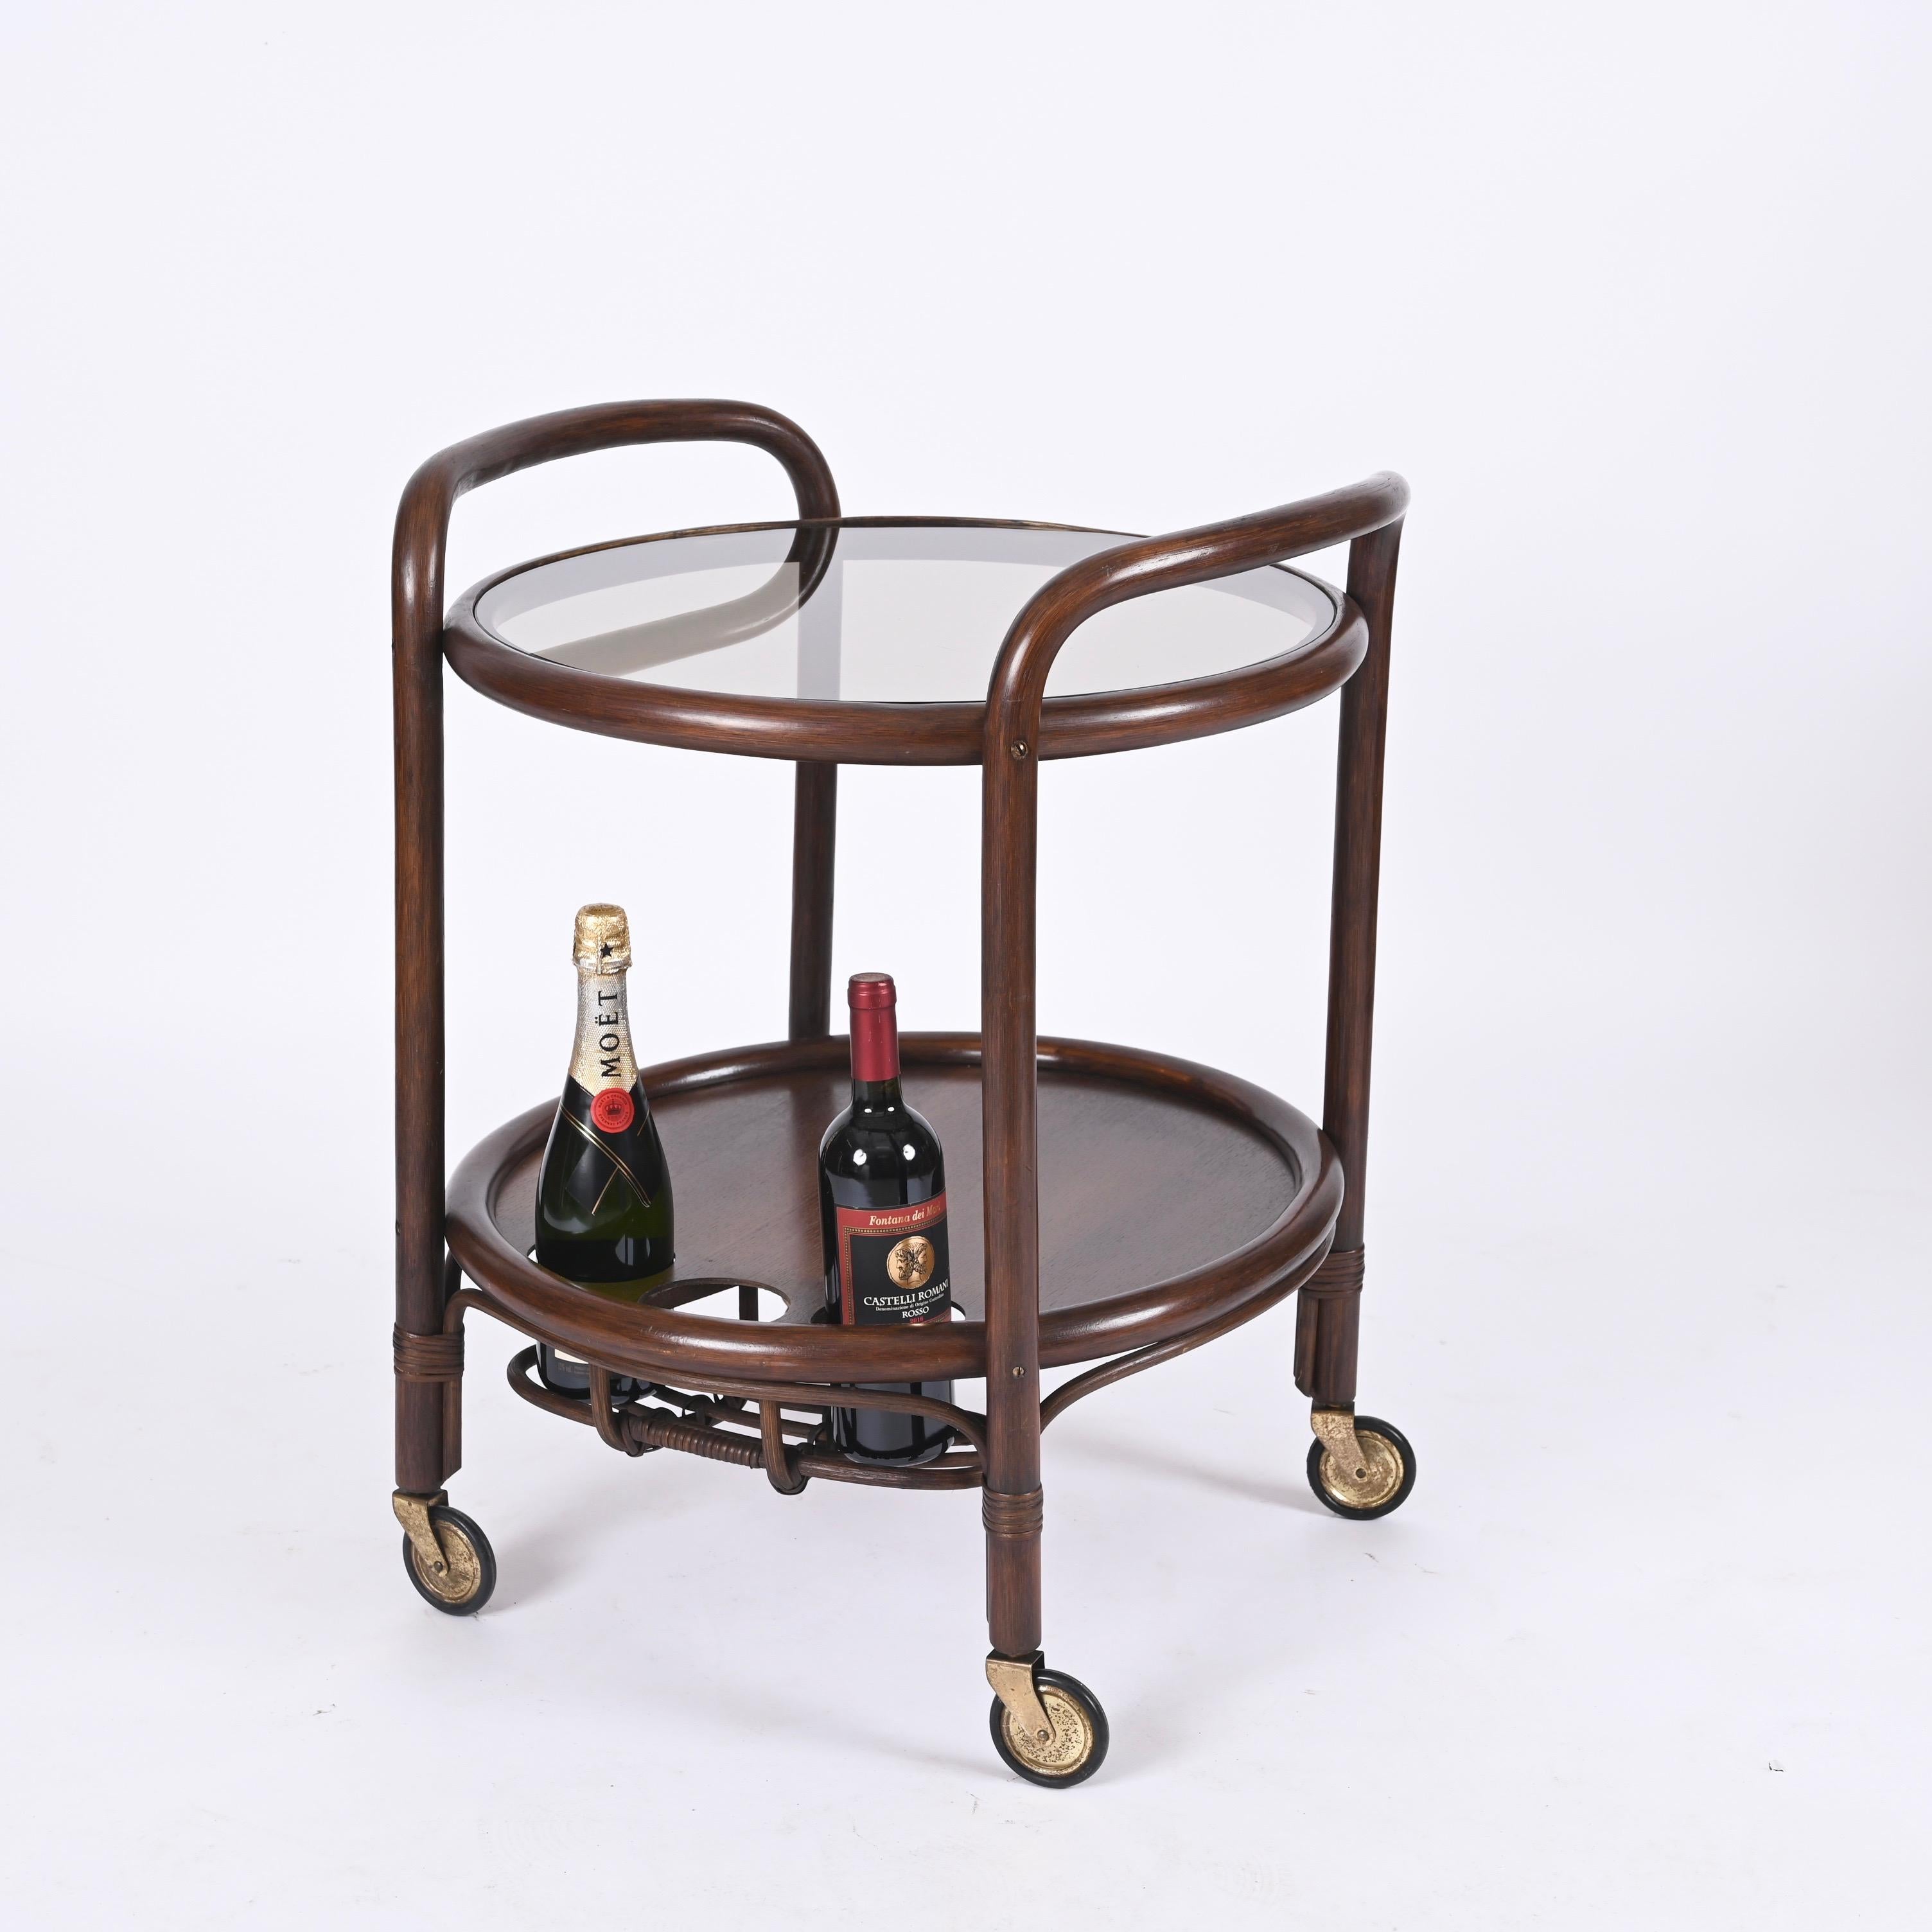 Midcentury Bar Serving Cart in Bamboo, Rattan and Smoked Glass, Italy, 1970s For Sale 1